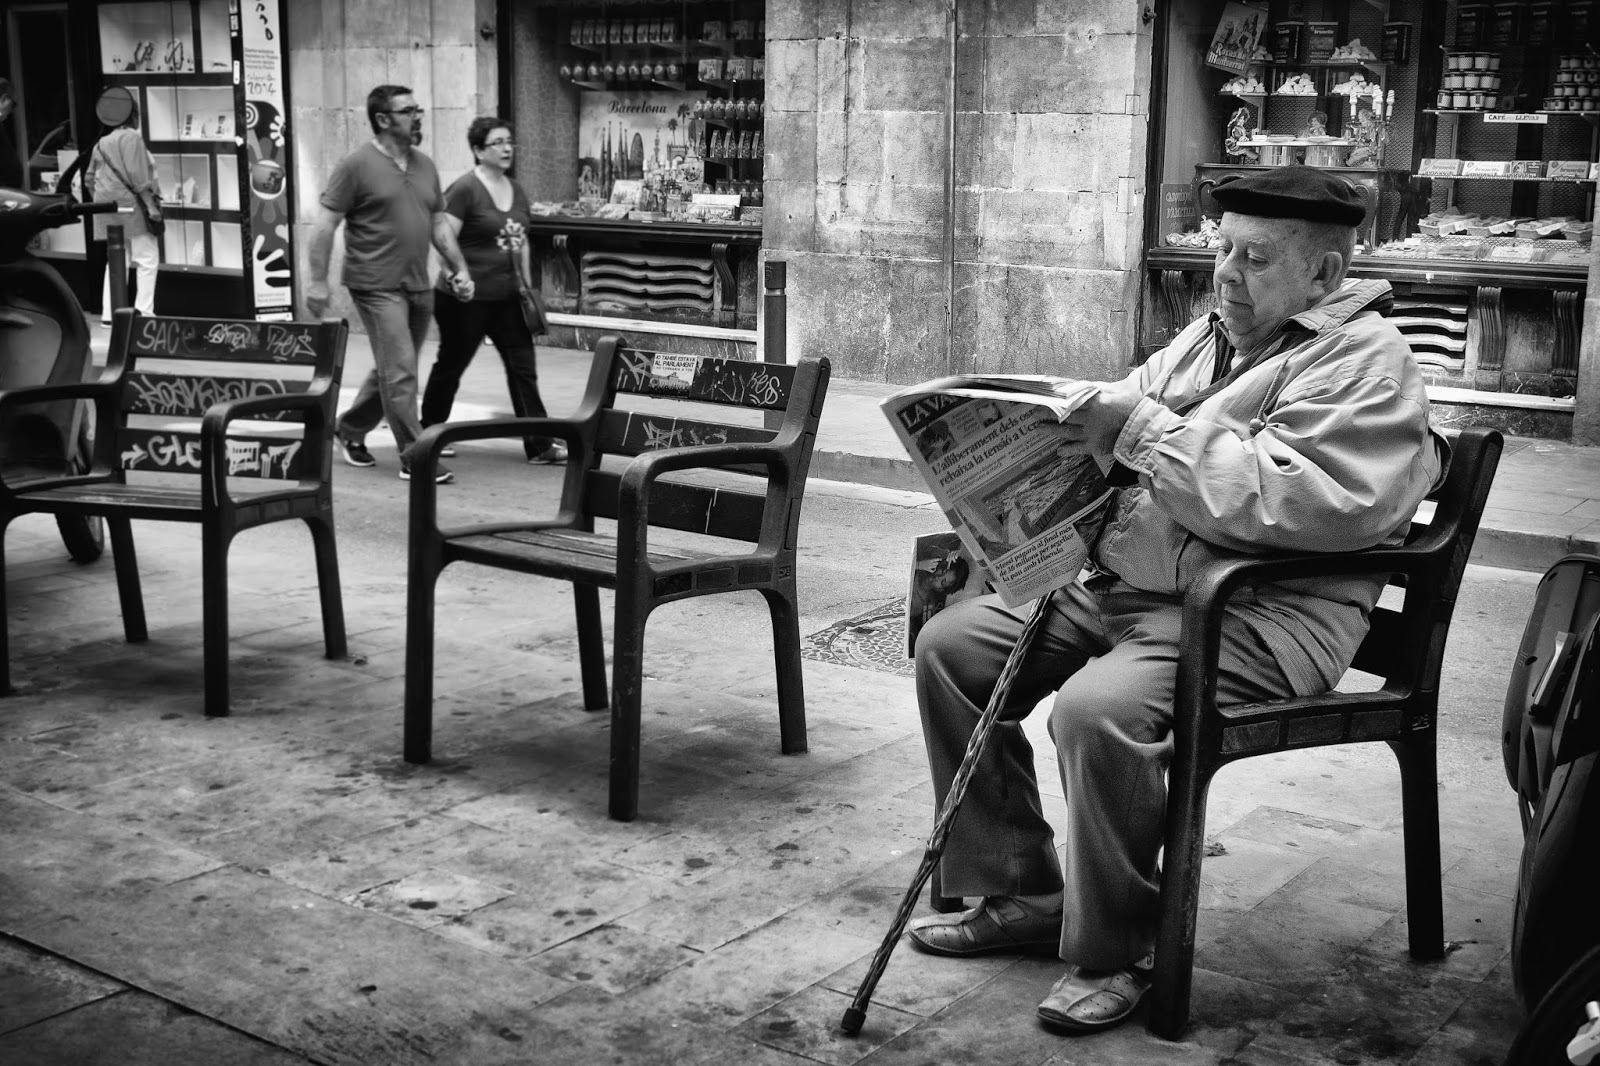 The Beret Project: Street Photography in Barcelona